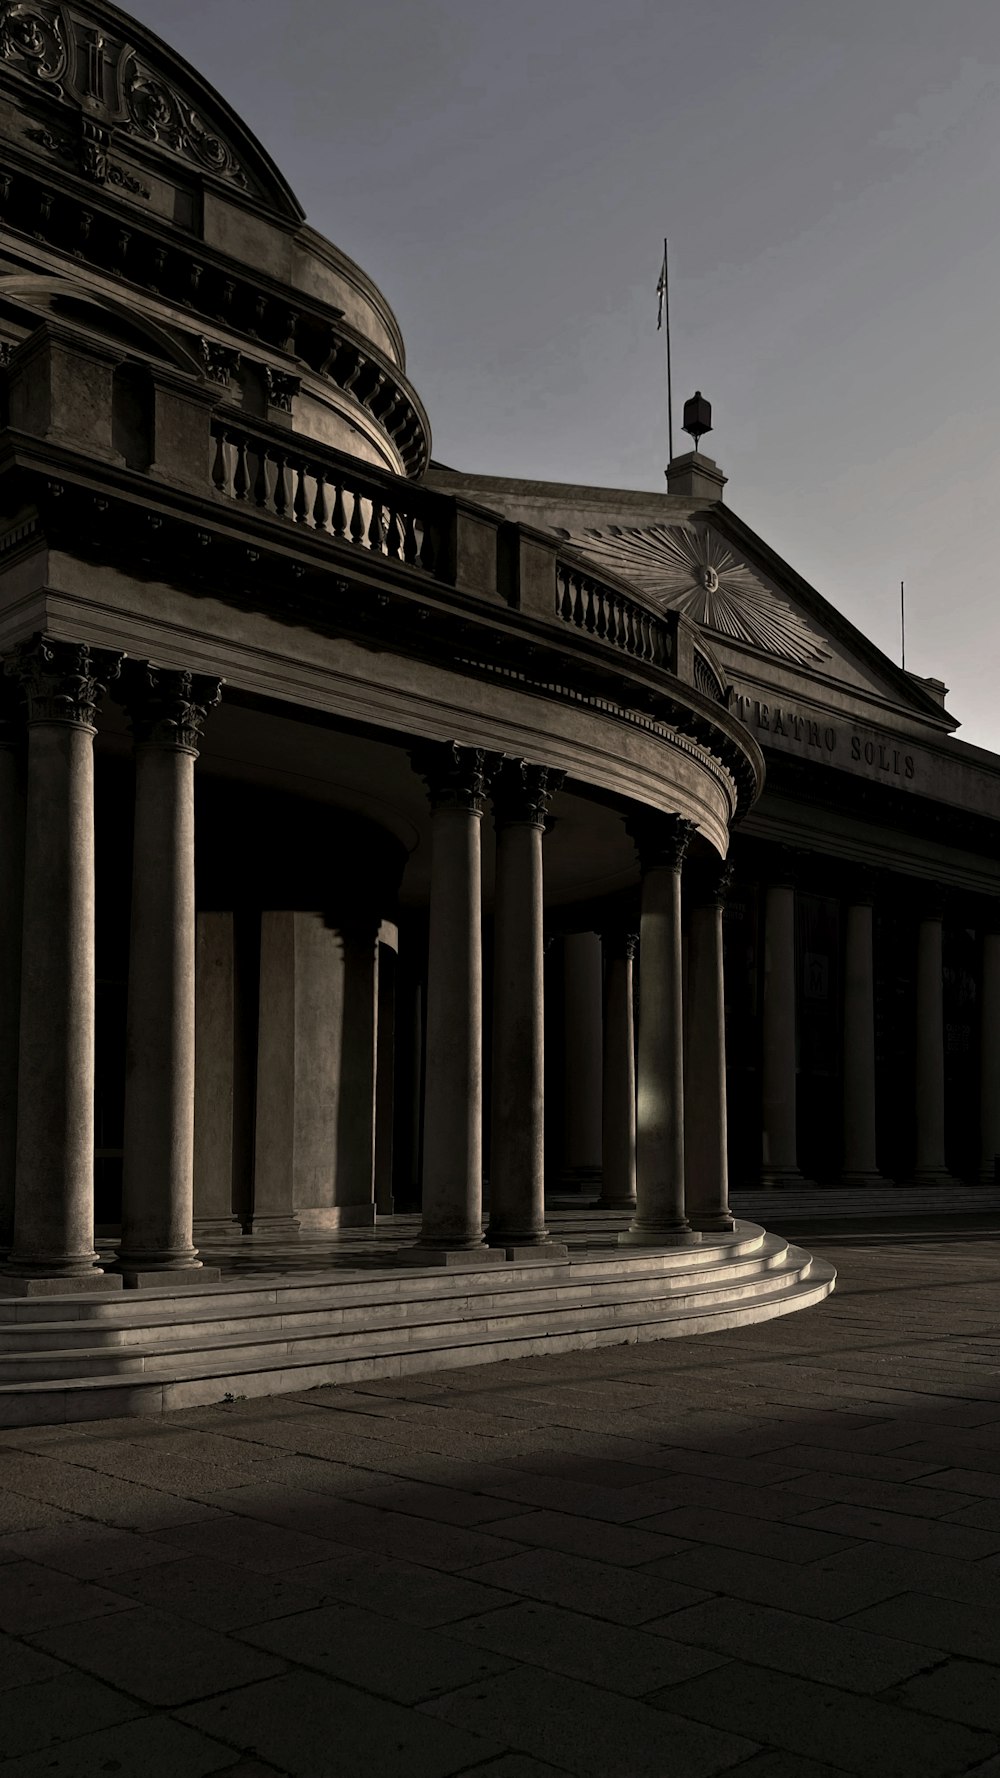 a black and white photo of a building with columns